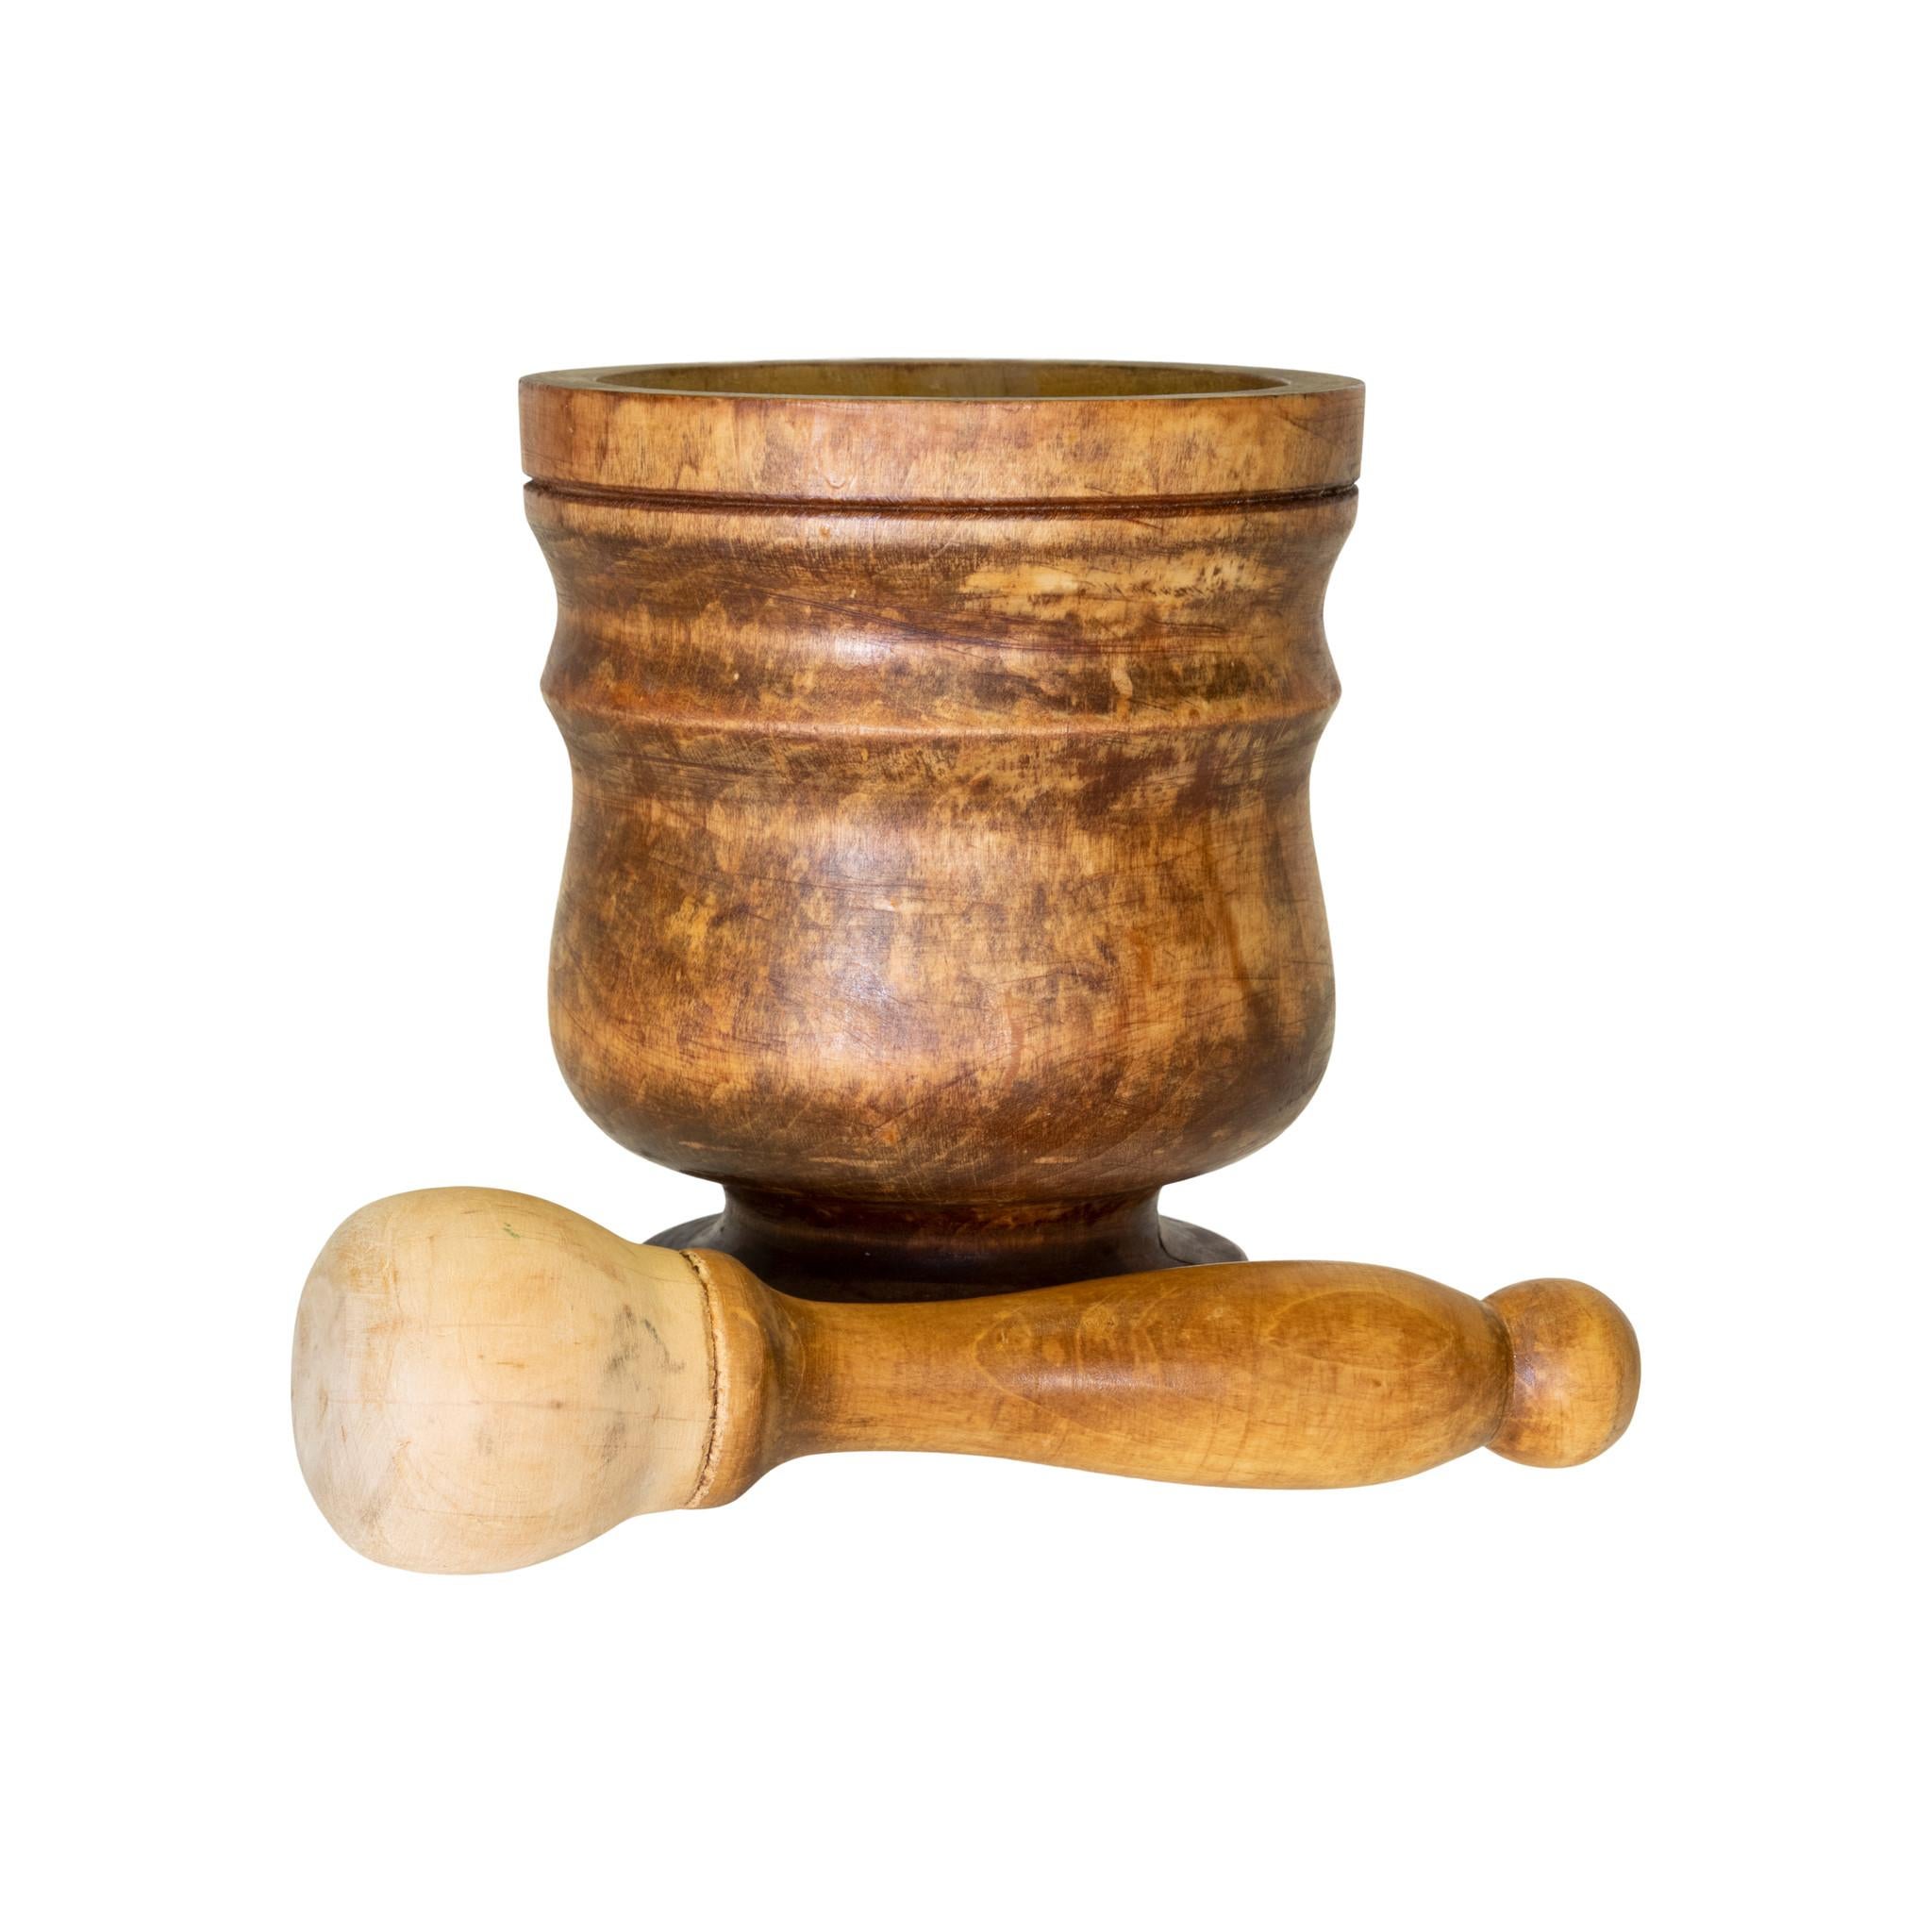 19th century fruitwood mortar and pestle. Lathe work, remnants of paint or dark stain. Original pestle included.

Period: First half of the 19th century
Origin: Eastern, US
Size: 5